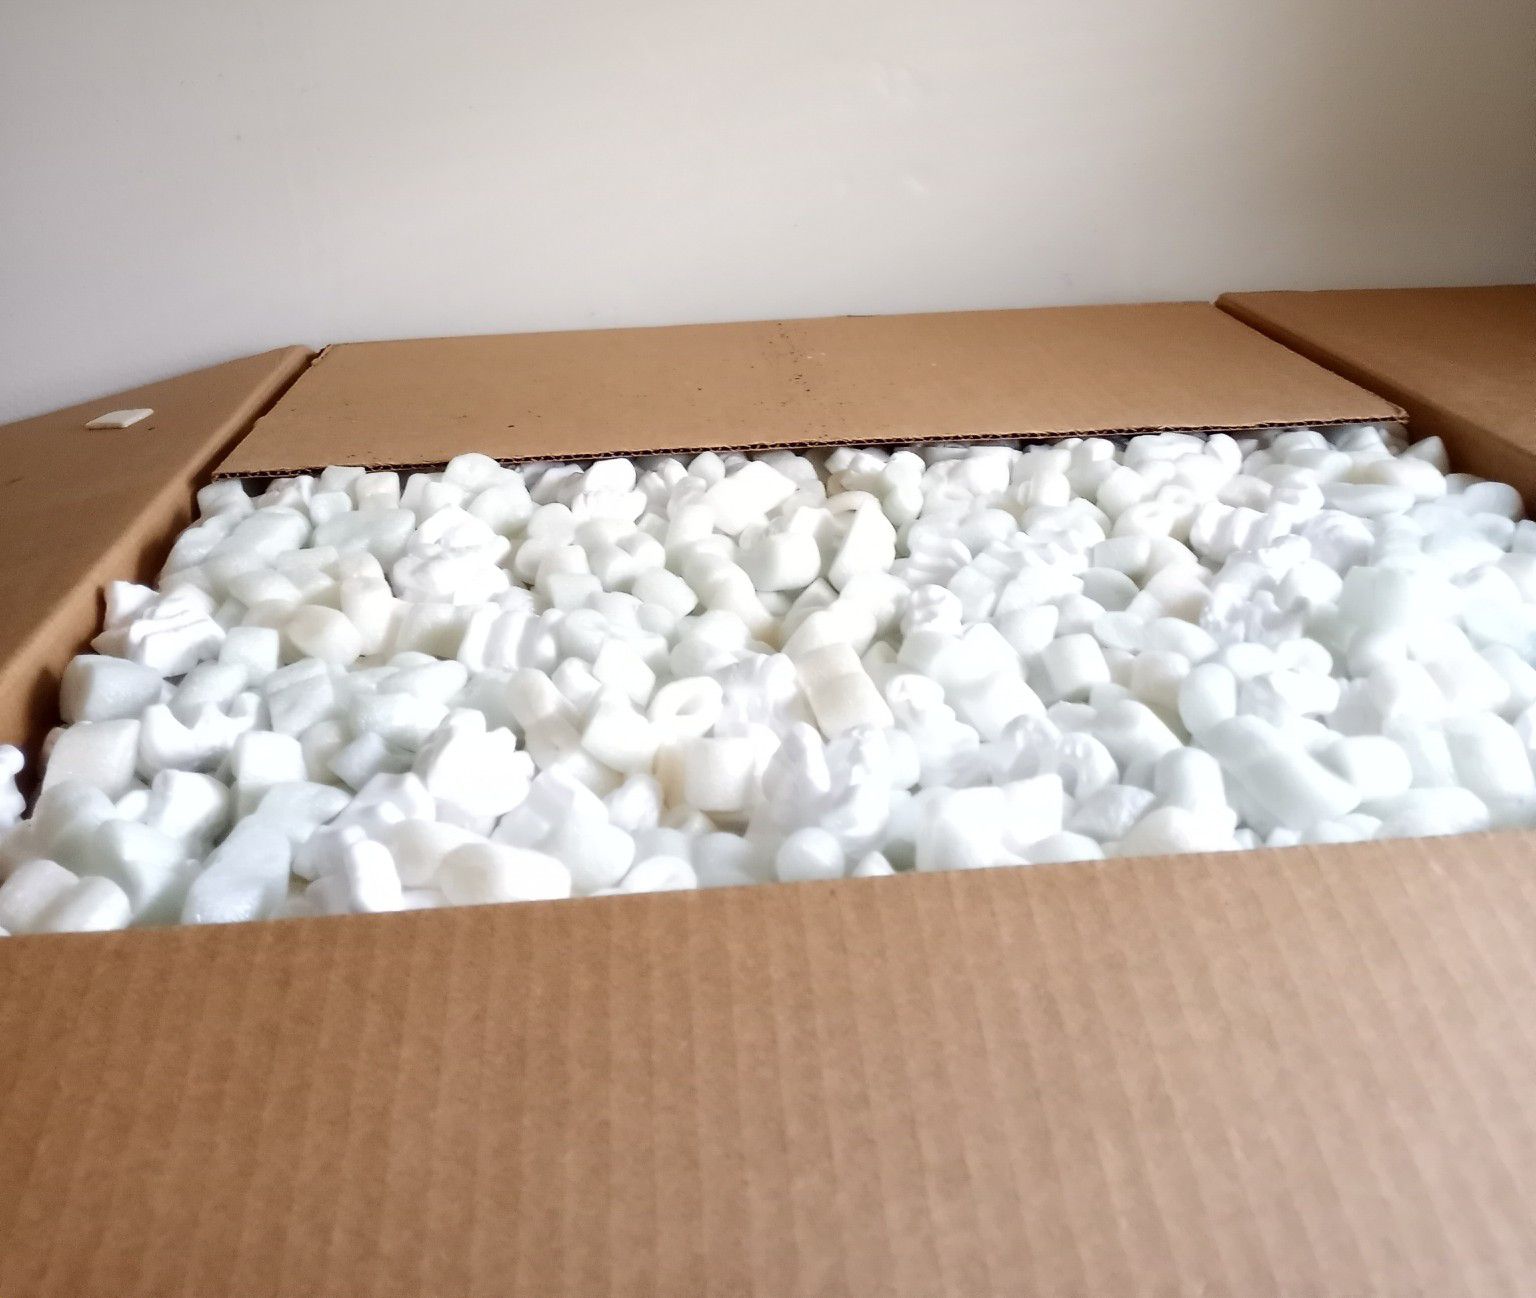 Lots and Lots of Packing Peanuts